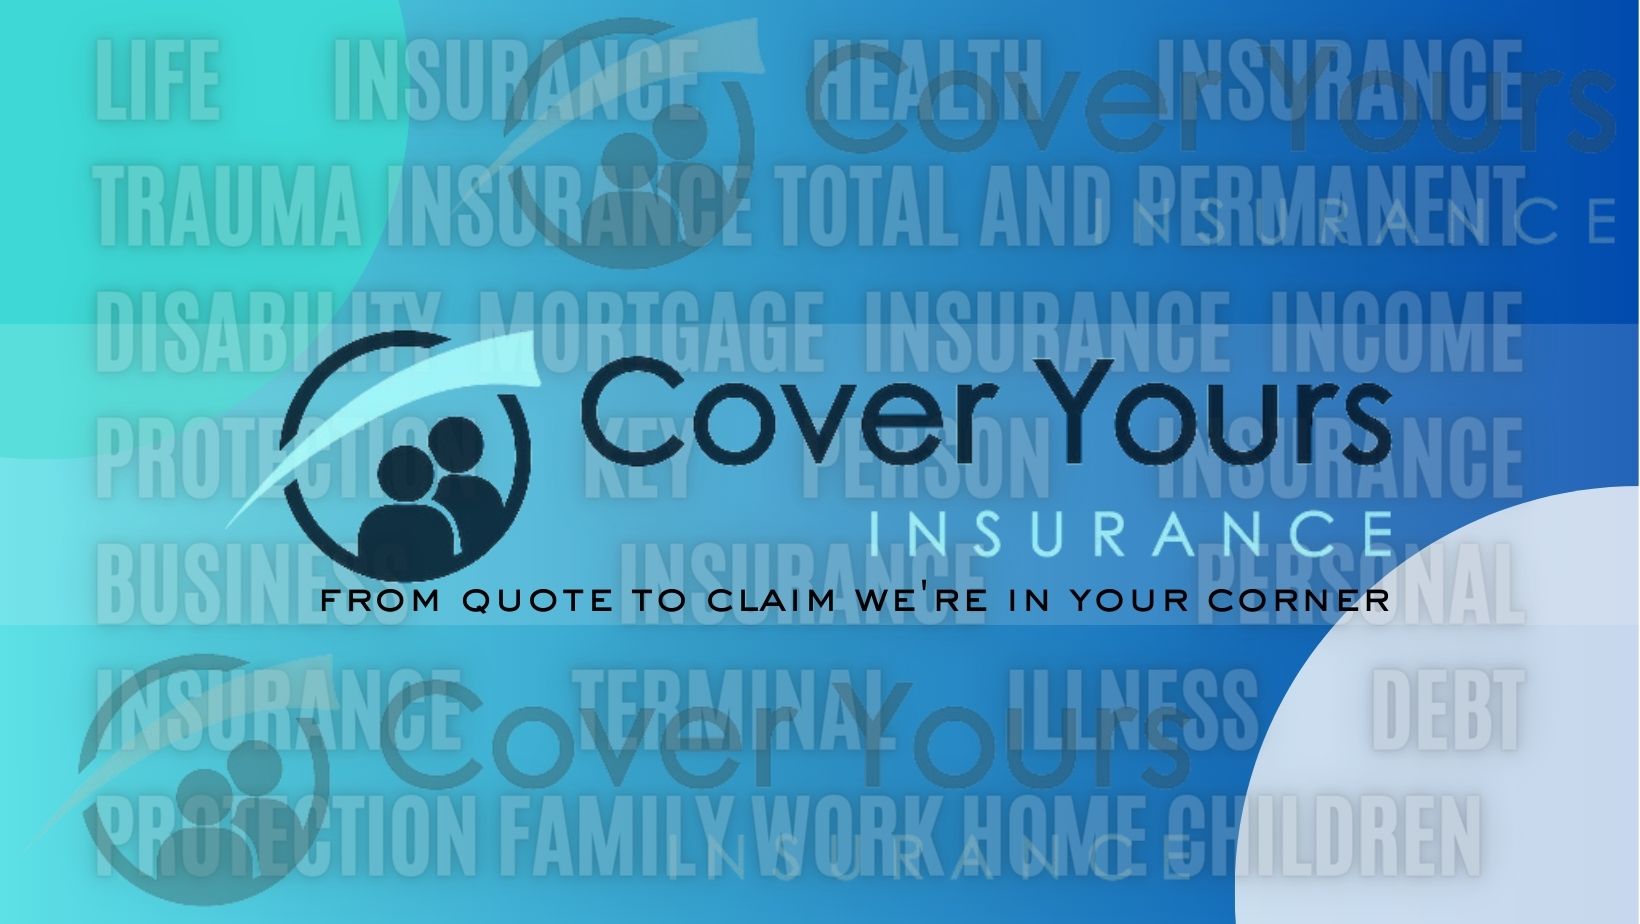 Cover Yours insurance. From Quote to Claim we're in your corner.